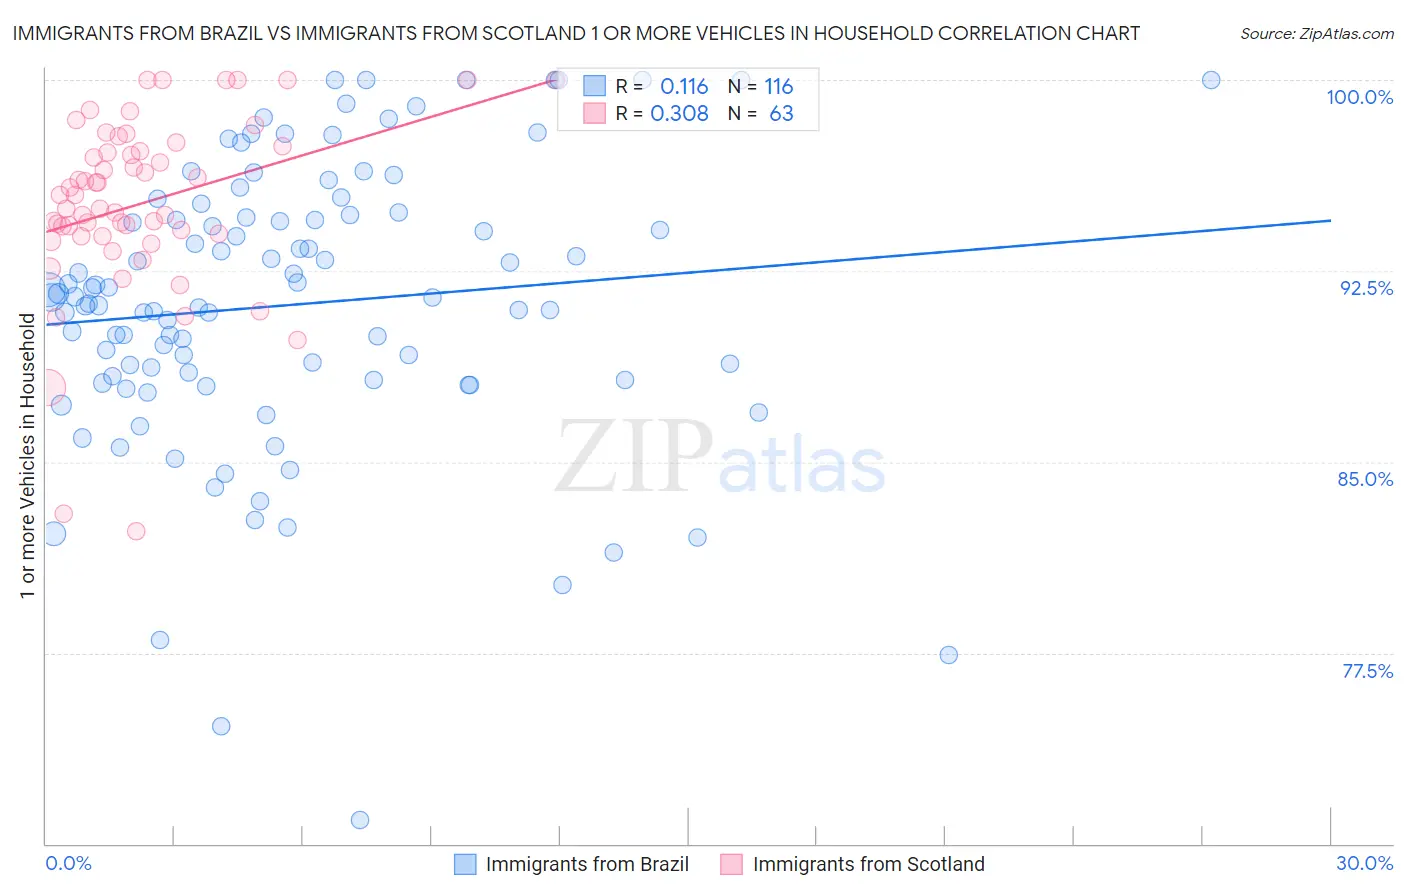 Immigrants from Brazil vs Immigrants from Scotland 1 or more Vehicles in Household